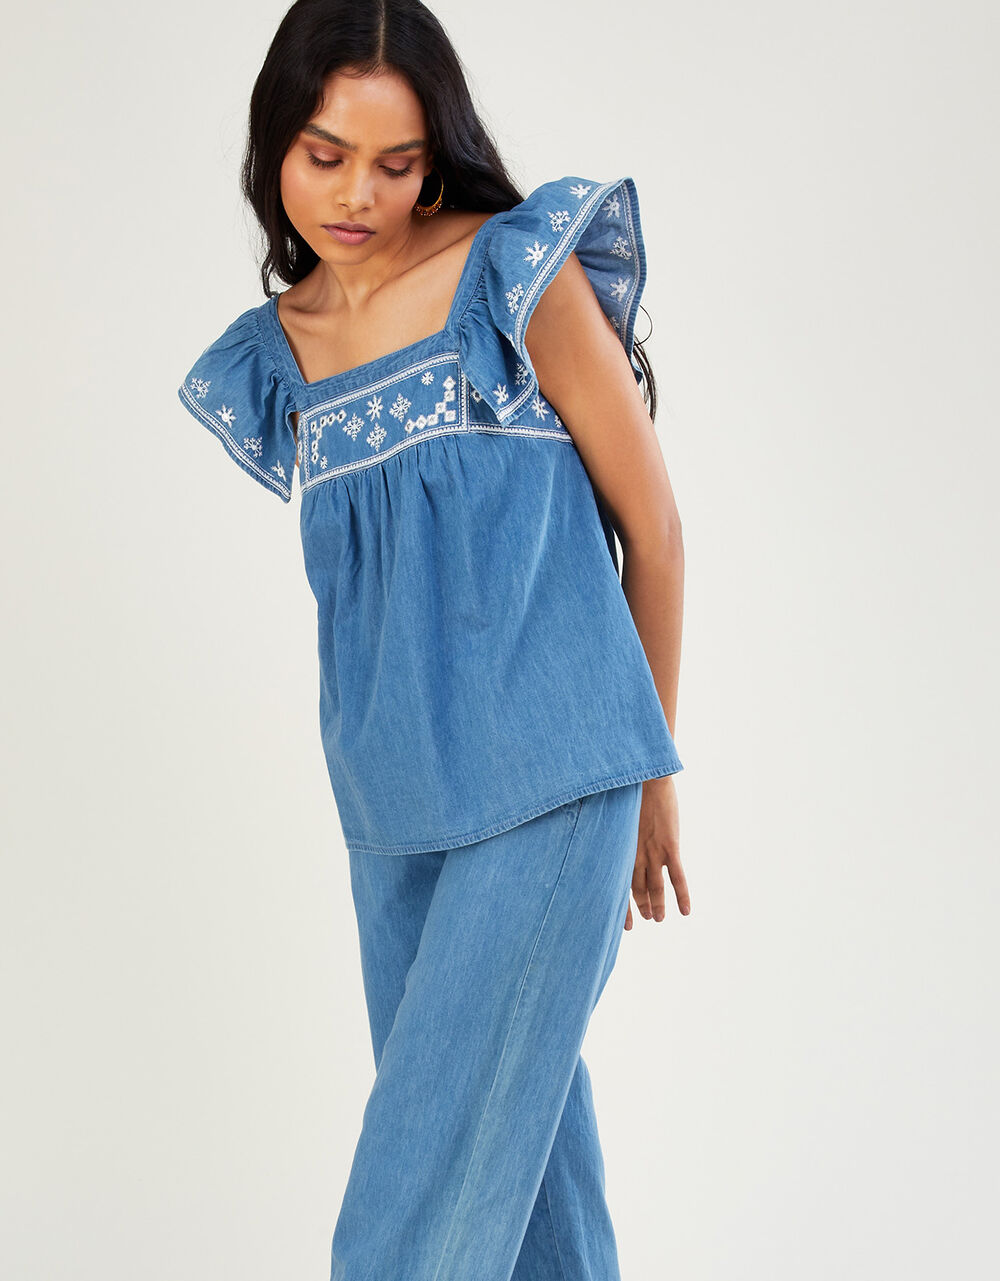 Women Women's Clothing | Embroidered Denim Top in Sustainable Cotton Blue - EI35104